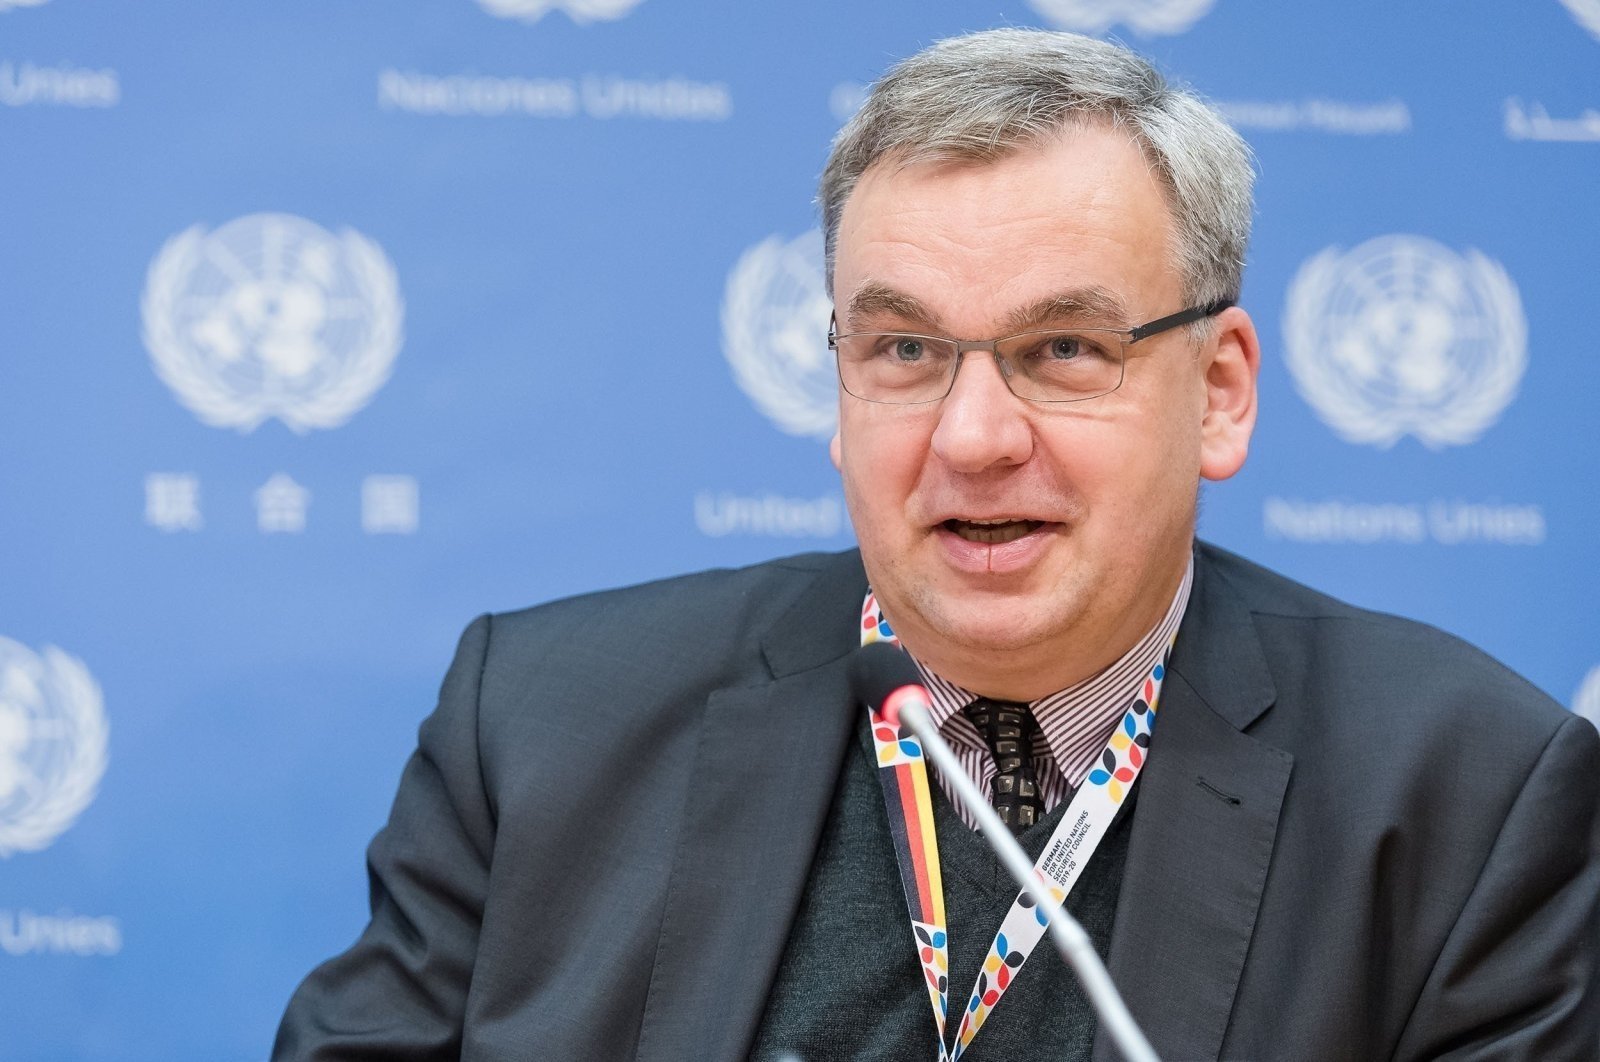 Jürgen Schulz, Germany&#039;s ambassador to Ankara, is seen at a news conference at the United Nations headquarters in New York, U.S., March 6, 2017. (Getty Images)